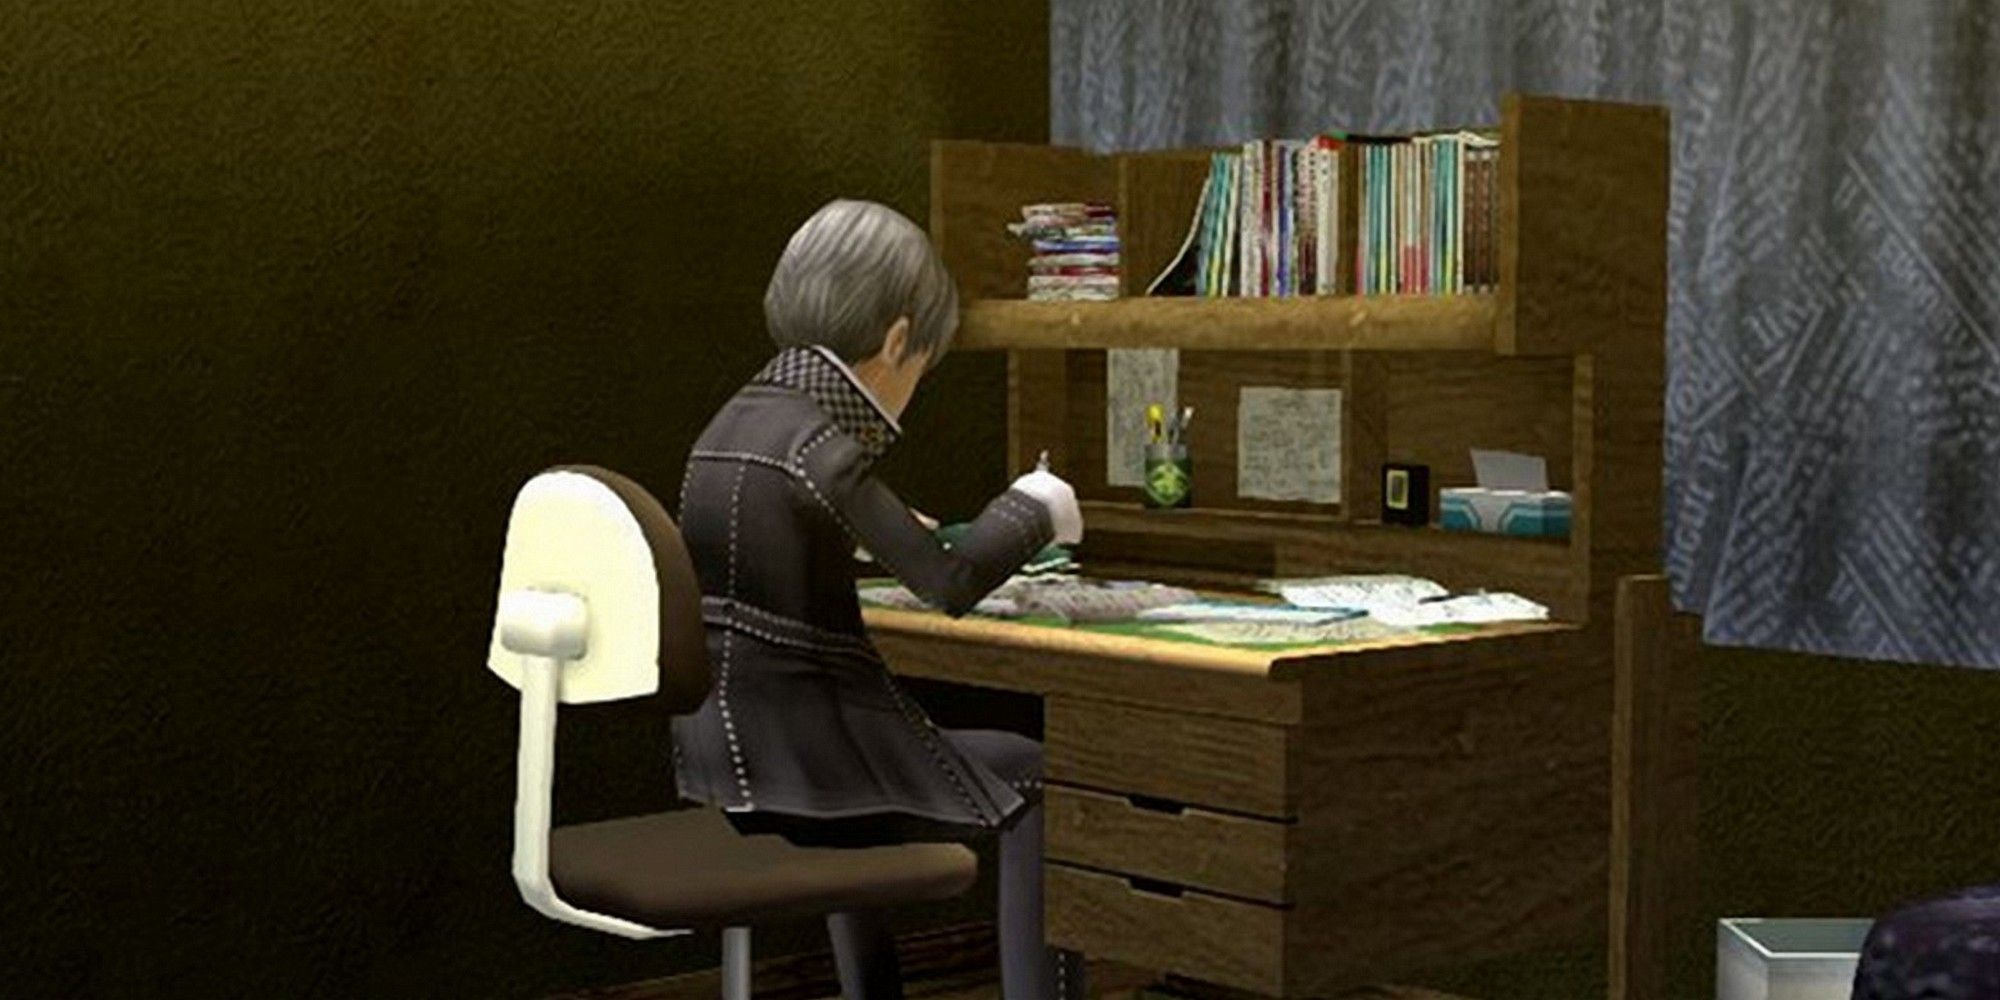 Yu studying at his desk in his room in Persona 4 Golden